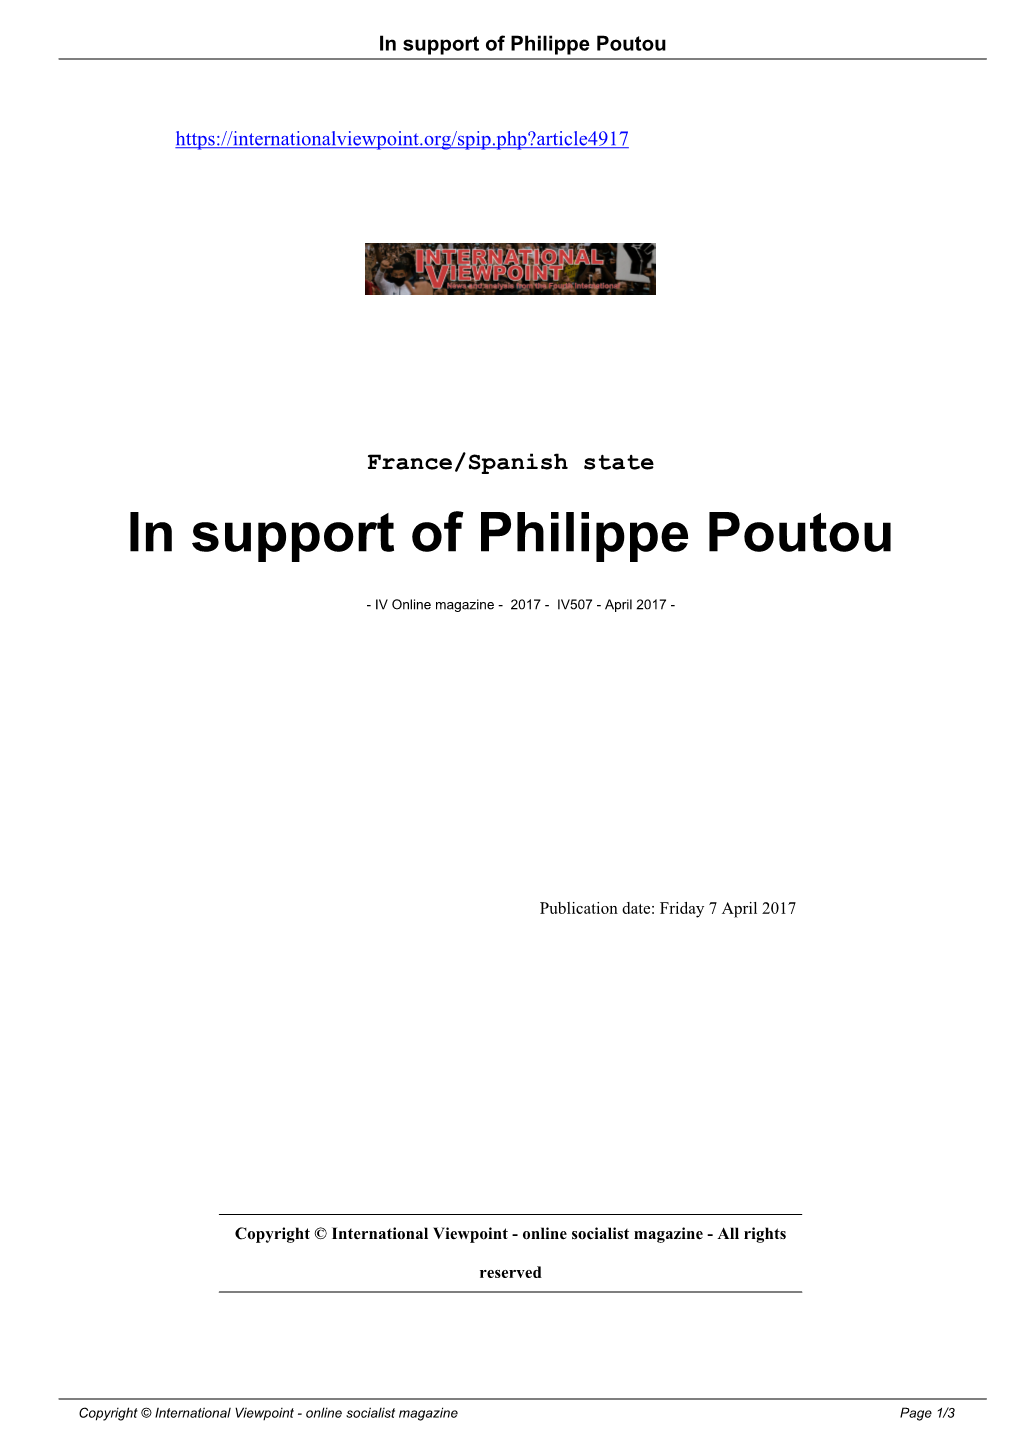 In Support of Philippe Poutou